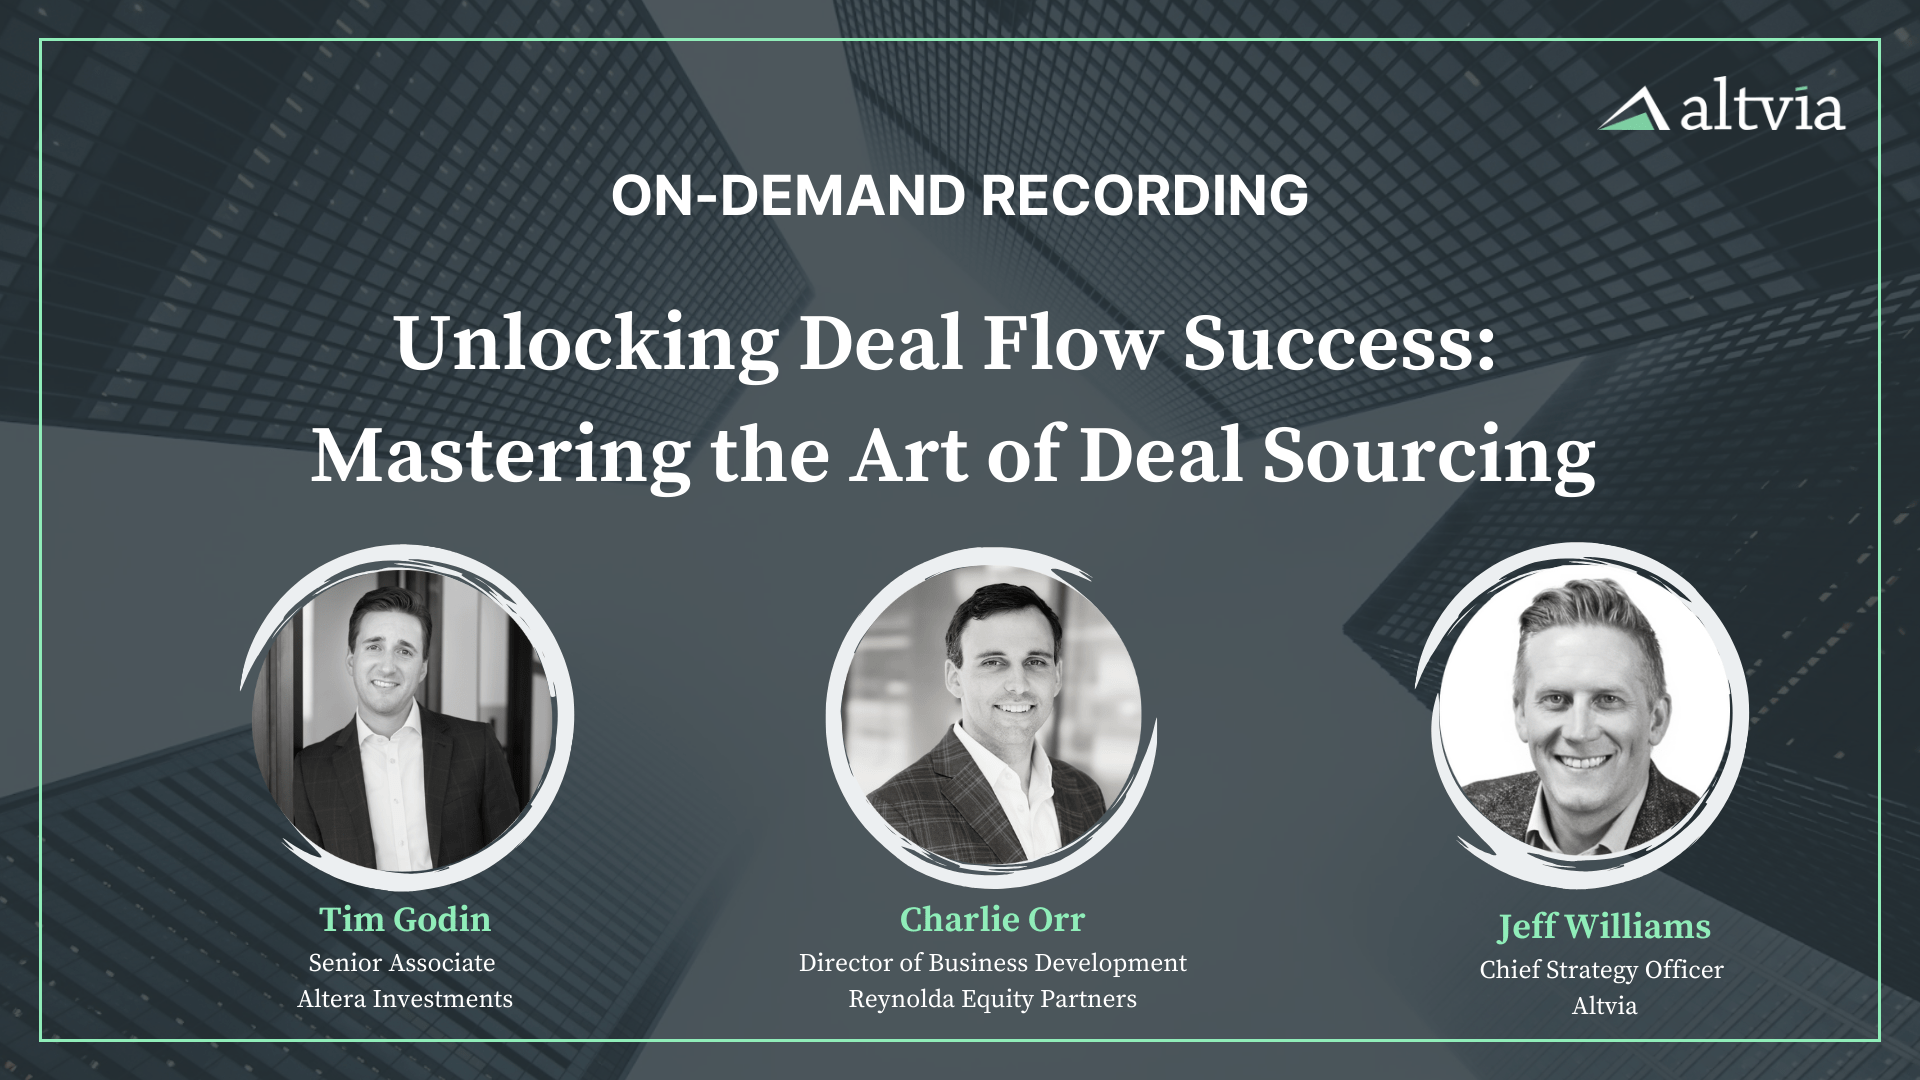 Unlocking Deal Flow Success: Mastering the Art of Deal Sourcing